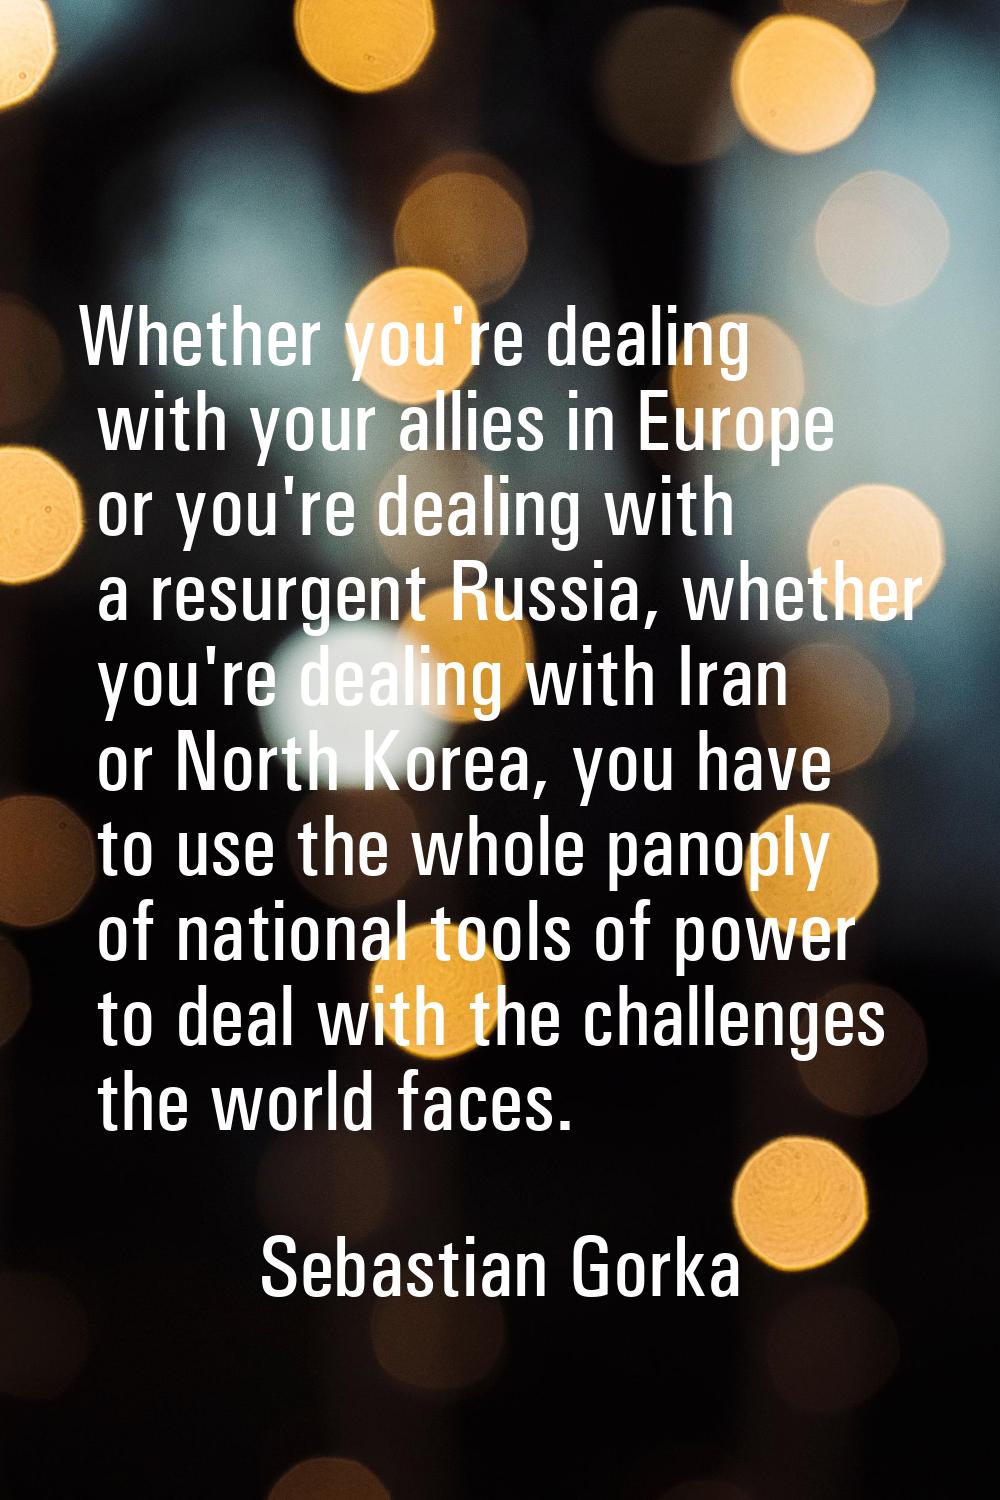 Whether you're dealing with your allies in Europe or you're dealing with a resurgent Russia, whethe